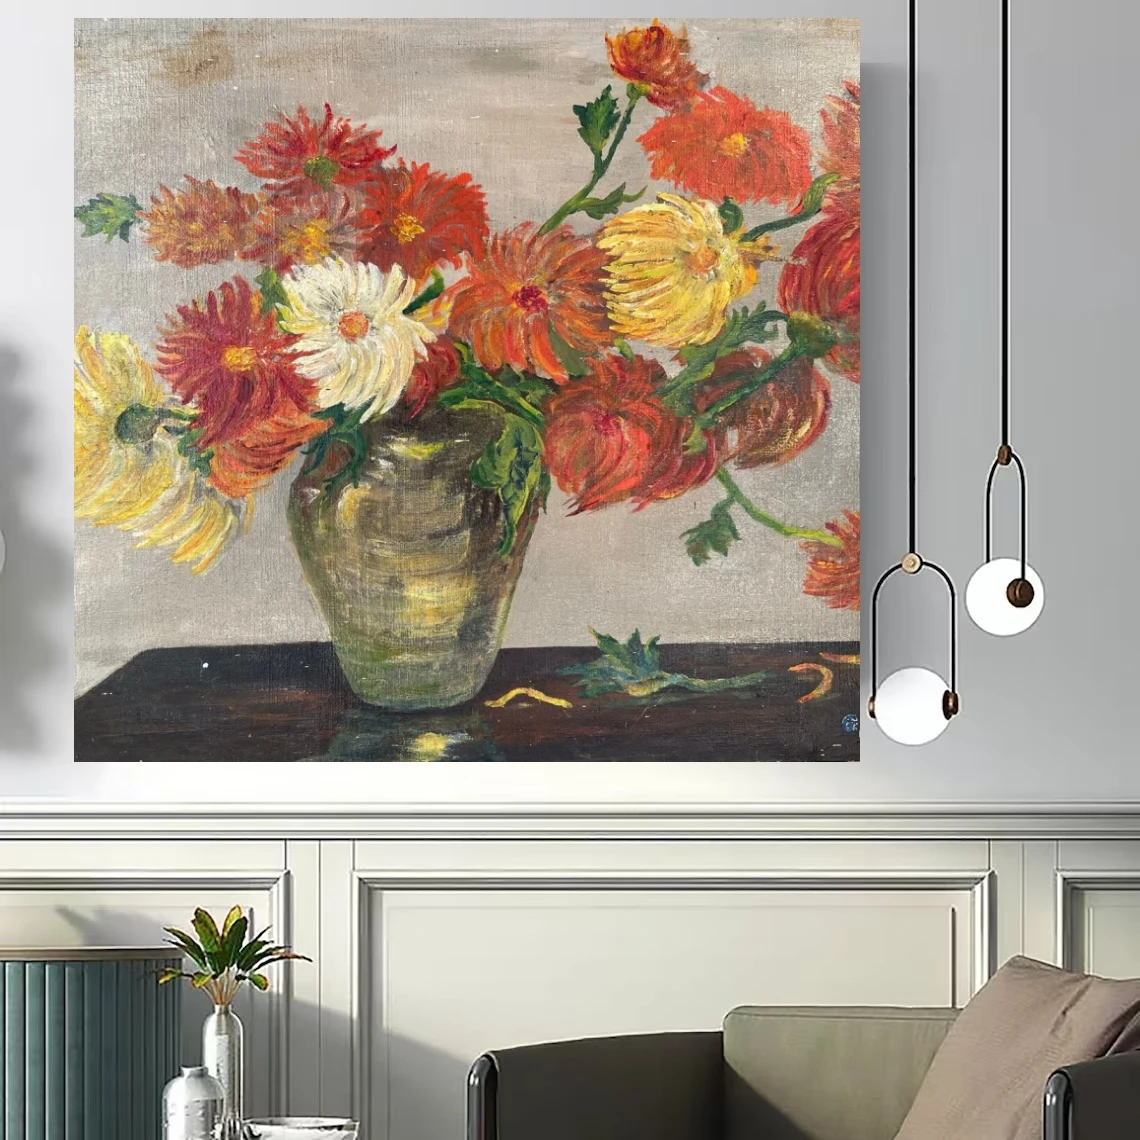 Vintage Froral Oil Painting on Canvas Impressionist Chrysanthemums Still Life Oil Art for Kitchen, Dining Room Wall Decor Hand